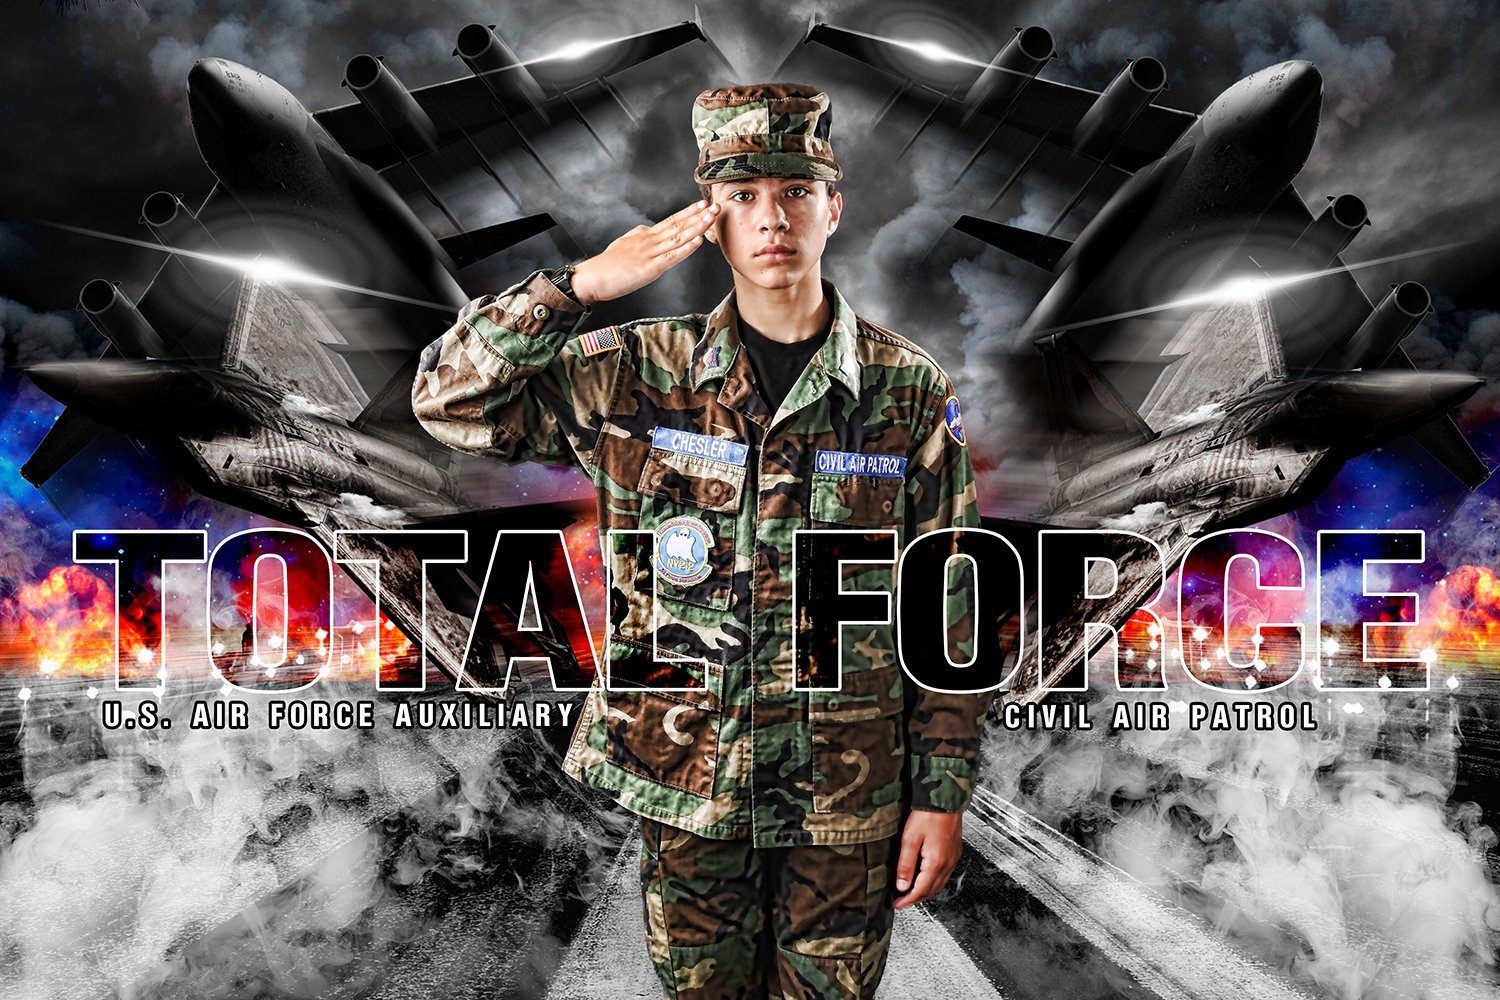 Air Force - V.1 - Heroes Series - Poster/Banner H-Photoshop Template - Photo Solutions